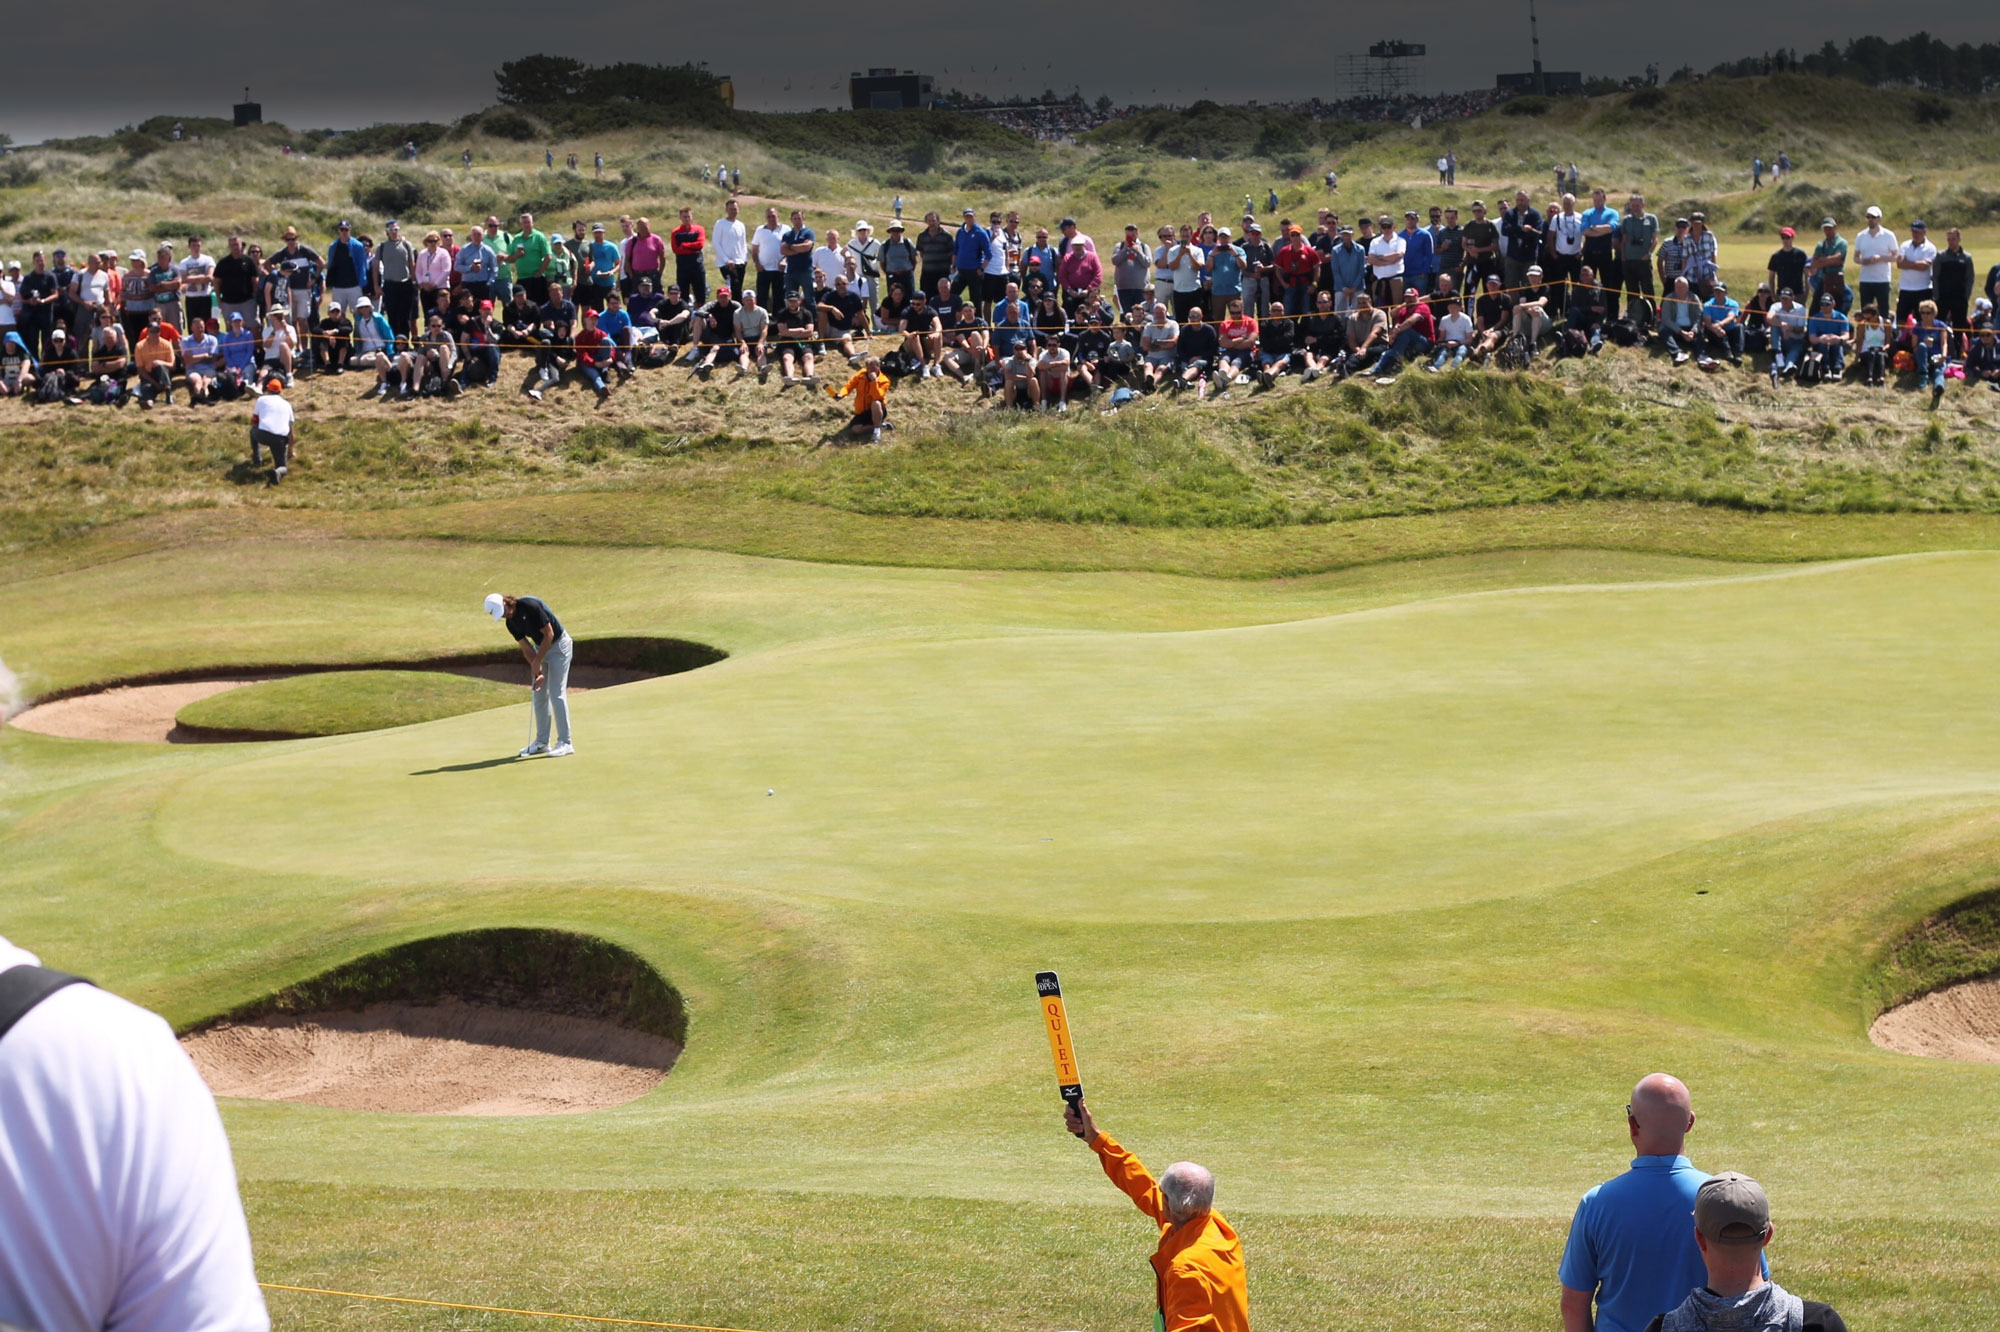 The Open Championship, The Open 2017 at Royal Birkdale Golf Club